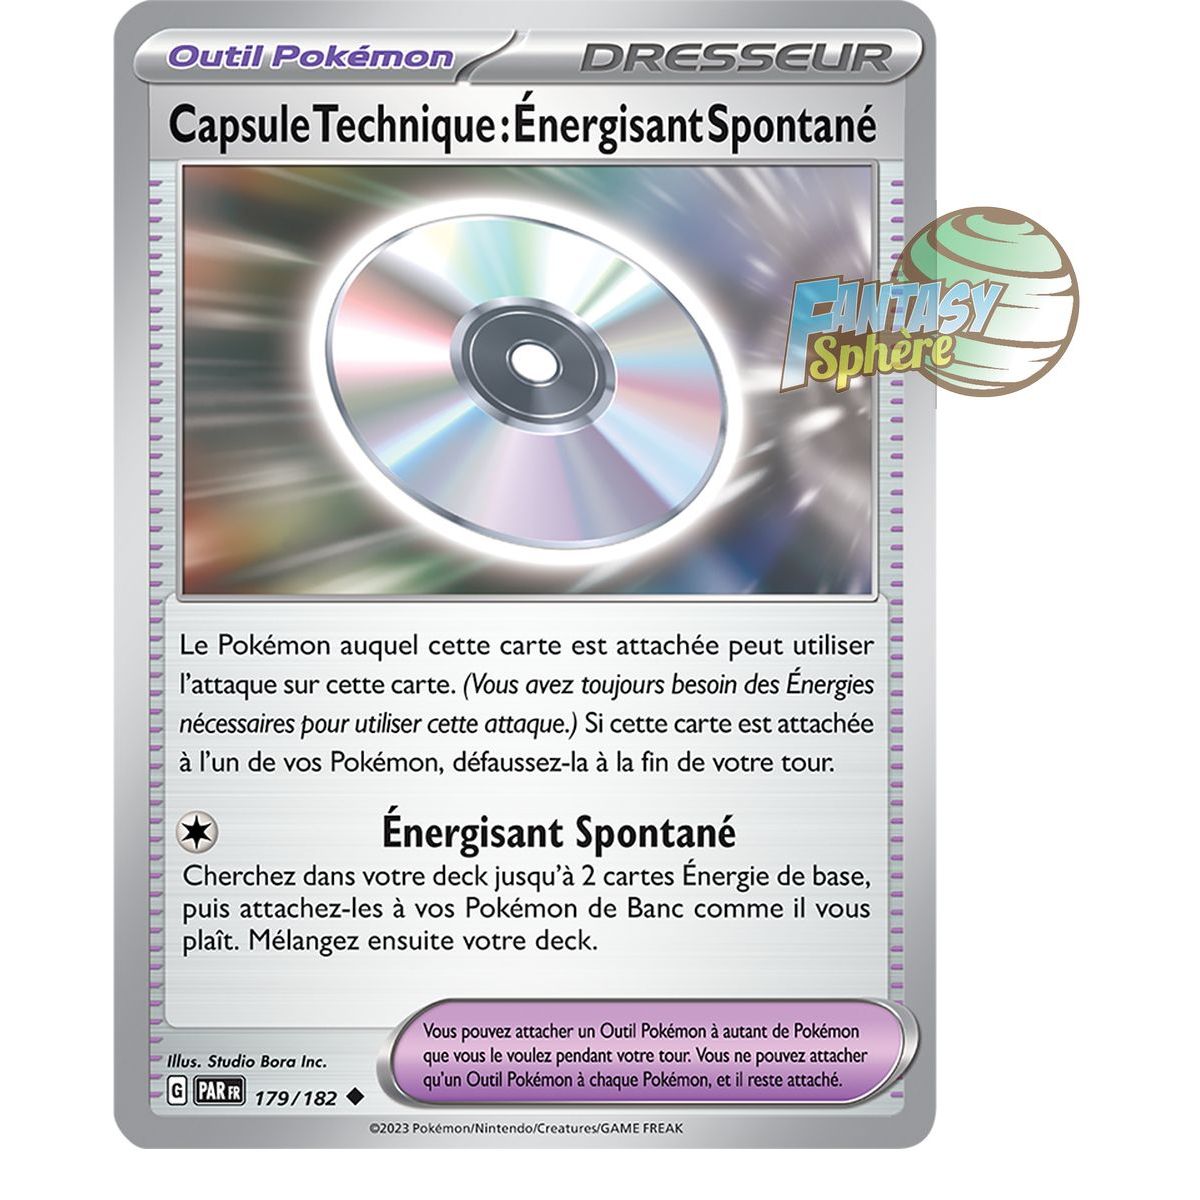 Technical Capsule: Spontaneous Energizer - Reverse 179/182 - Scarlet and Violet Faille Paradox